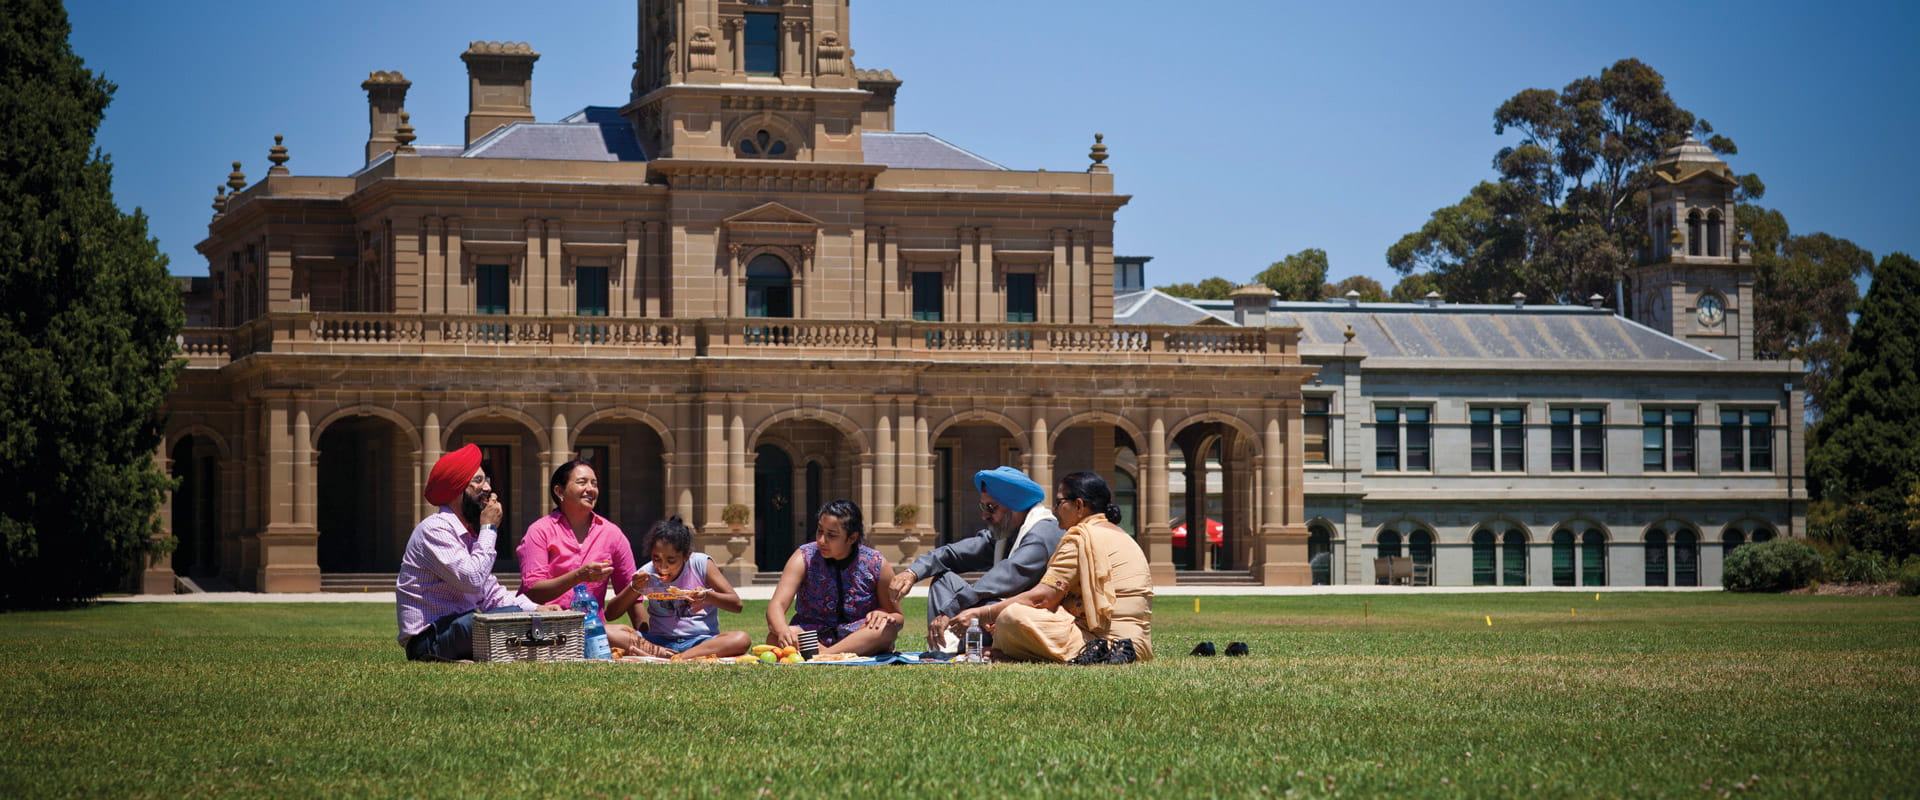 A family of six enjoy a picnic on a green, manicured lawn in front of a multi-storey sandstone mansion featuring striking columns and archways.